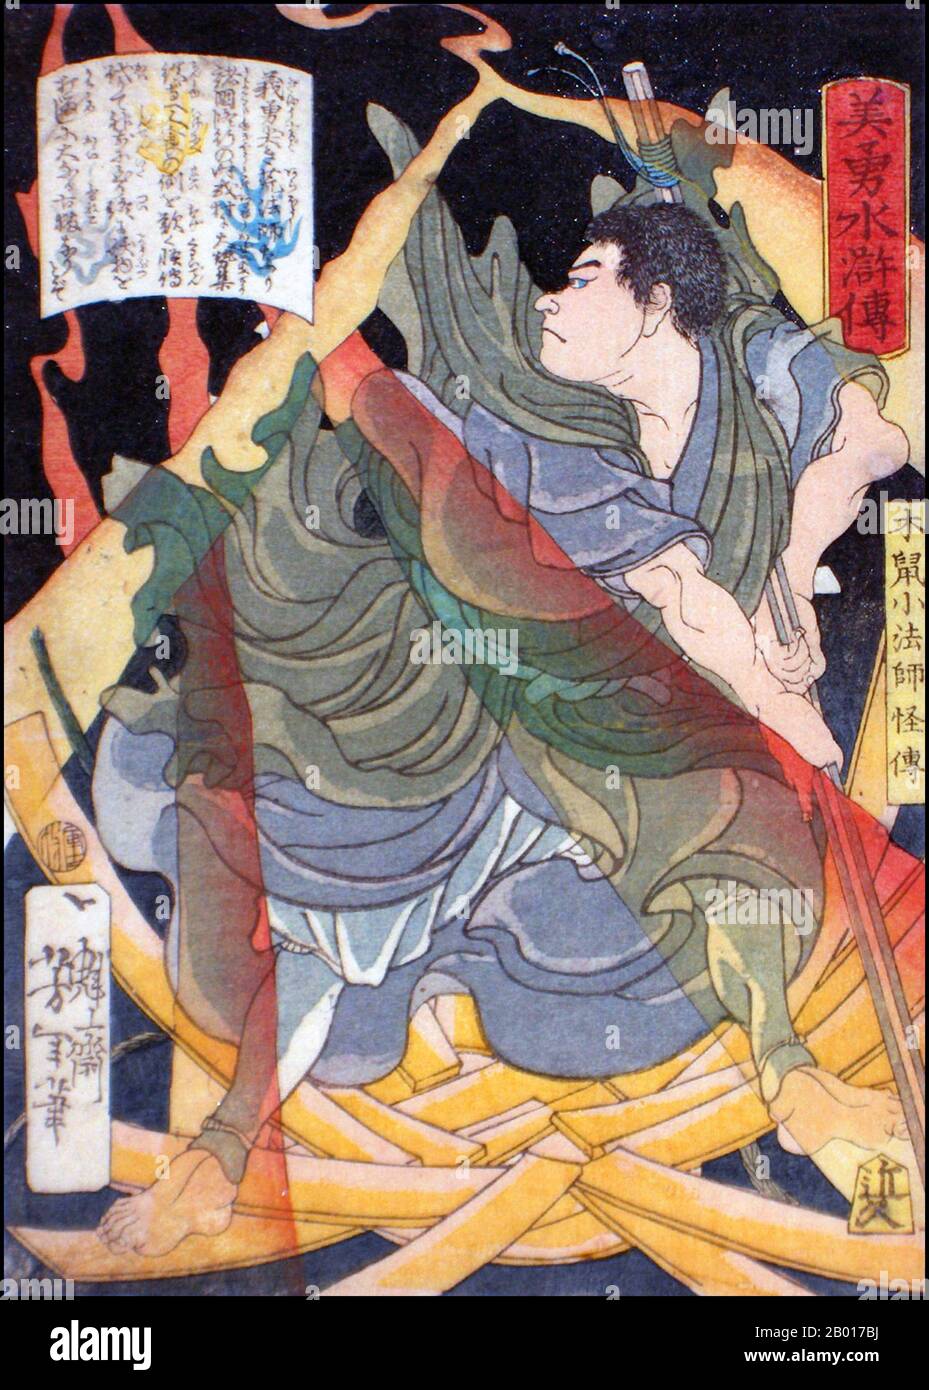 Japan: 'The Monk Kaiden Killing a Wild Cat'. Ukiyo-e woodblock print from the series 'Heroes of the Water Margin' by Tsukioka Yoshitoshi (1839 - 9 June 1892), 1866.  Tsukioka Yoshitoshi, also named Taiso Yoshitoshi, was a Japanese artist. He is widely recognized as the last great master of Ukiyo-e, a type of Japanese woodblock printing. He is additionally regarded as one of the form's greatest innovators. His career spanned two eras – the last years of feudal Japan, and the first years of modern Japan following the Meiji Restoration. Stock Photo